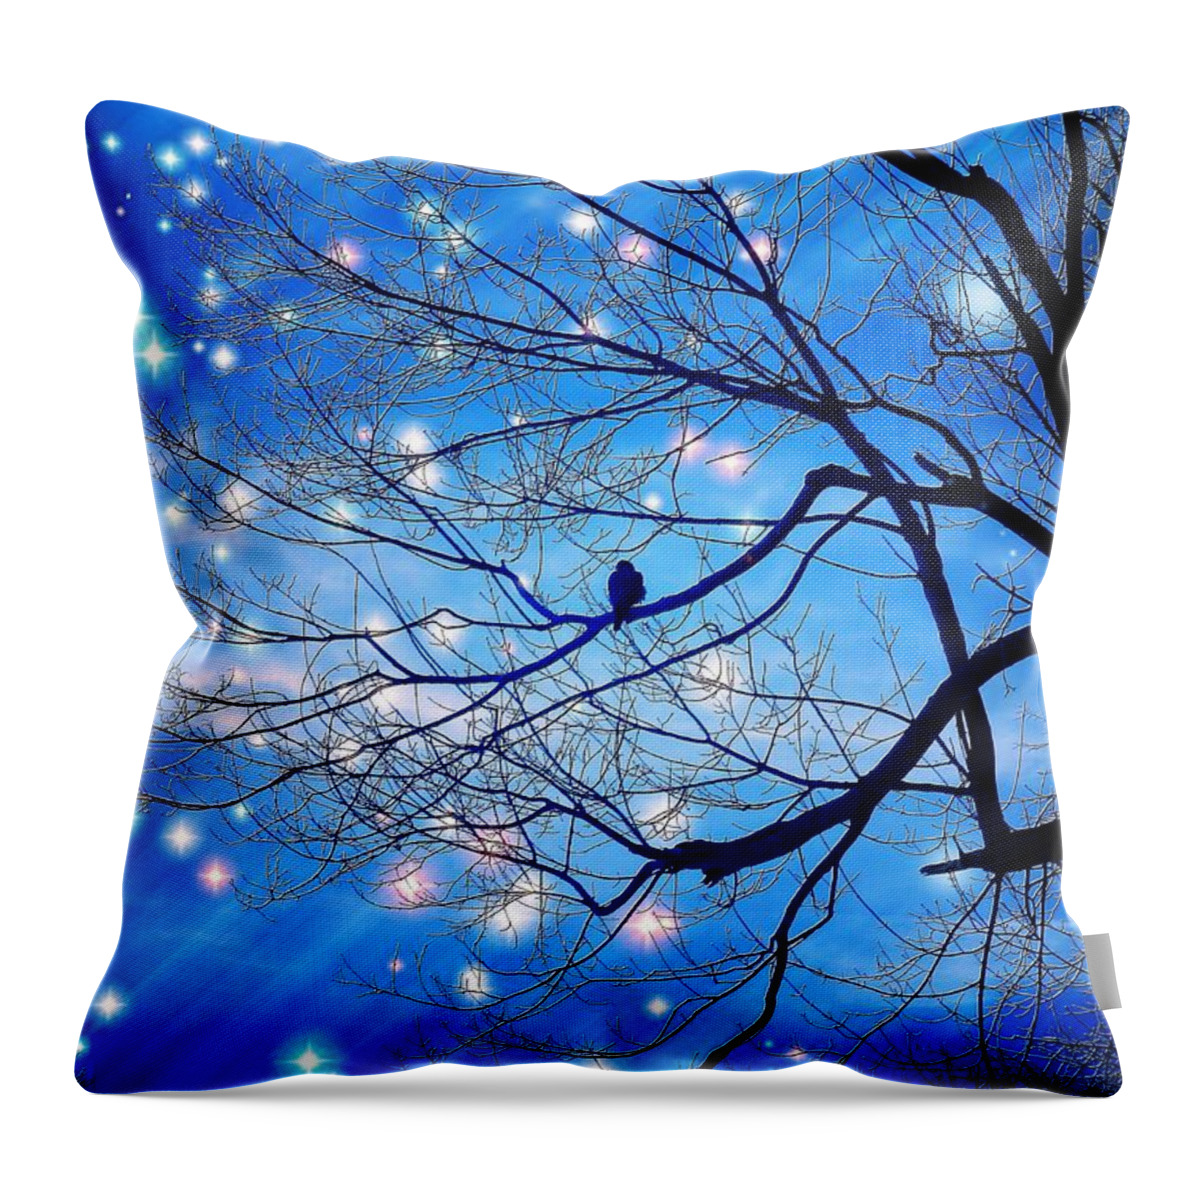 Bird Throw Pillow featuring the photograph Alone With The Stars by Zinvolle Art